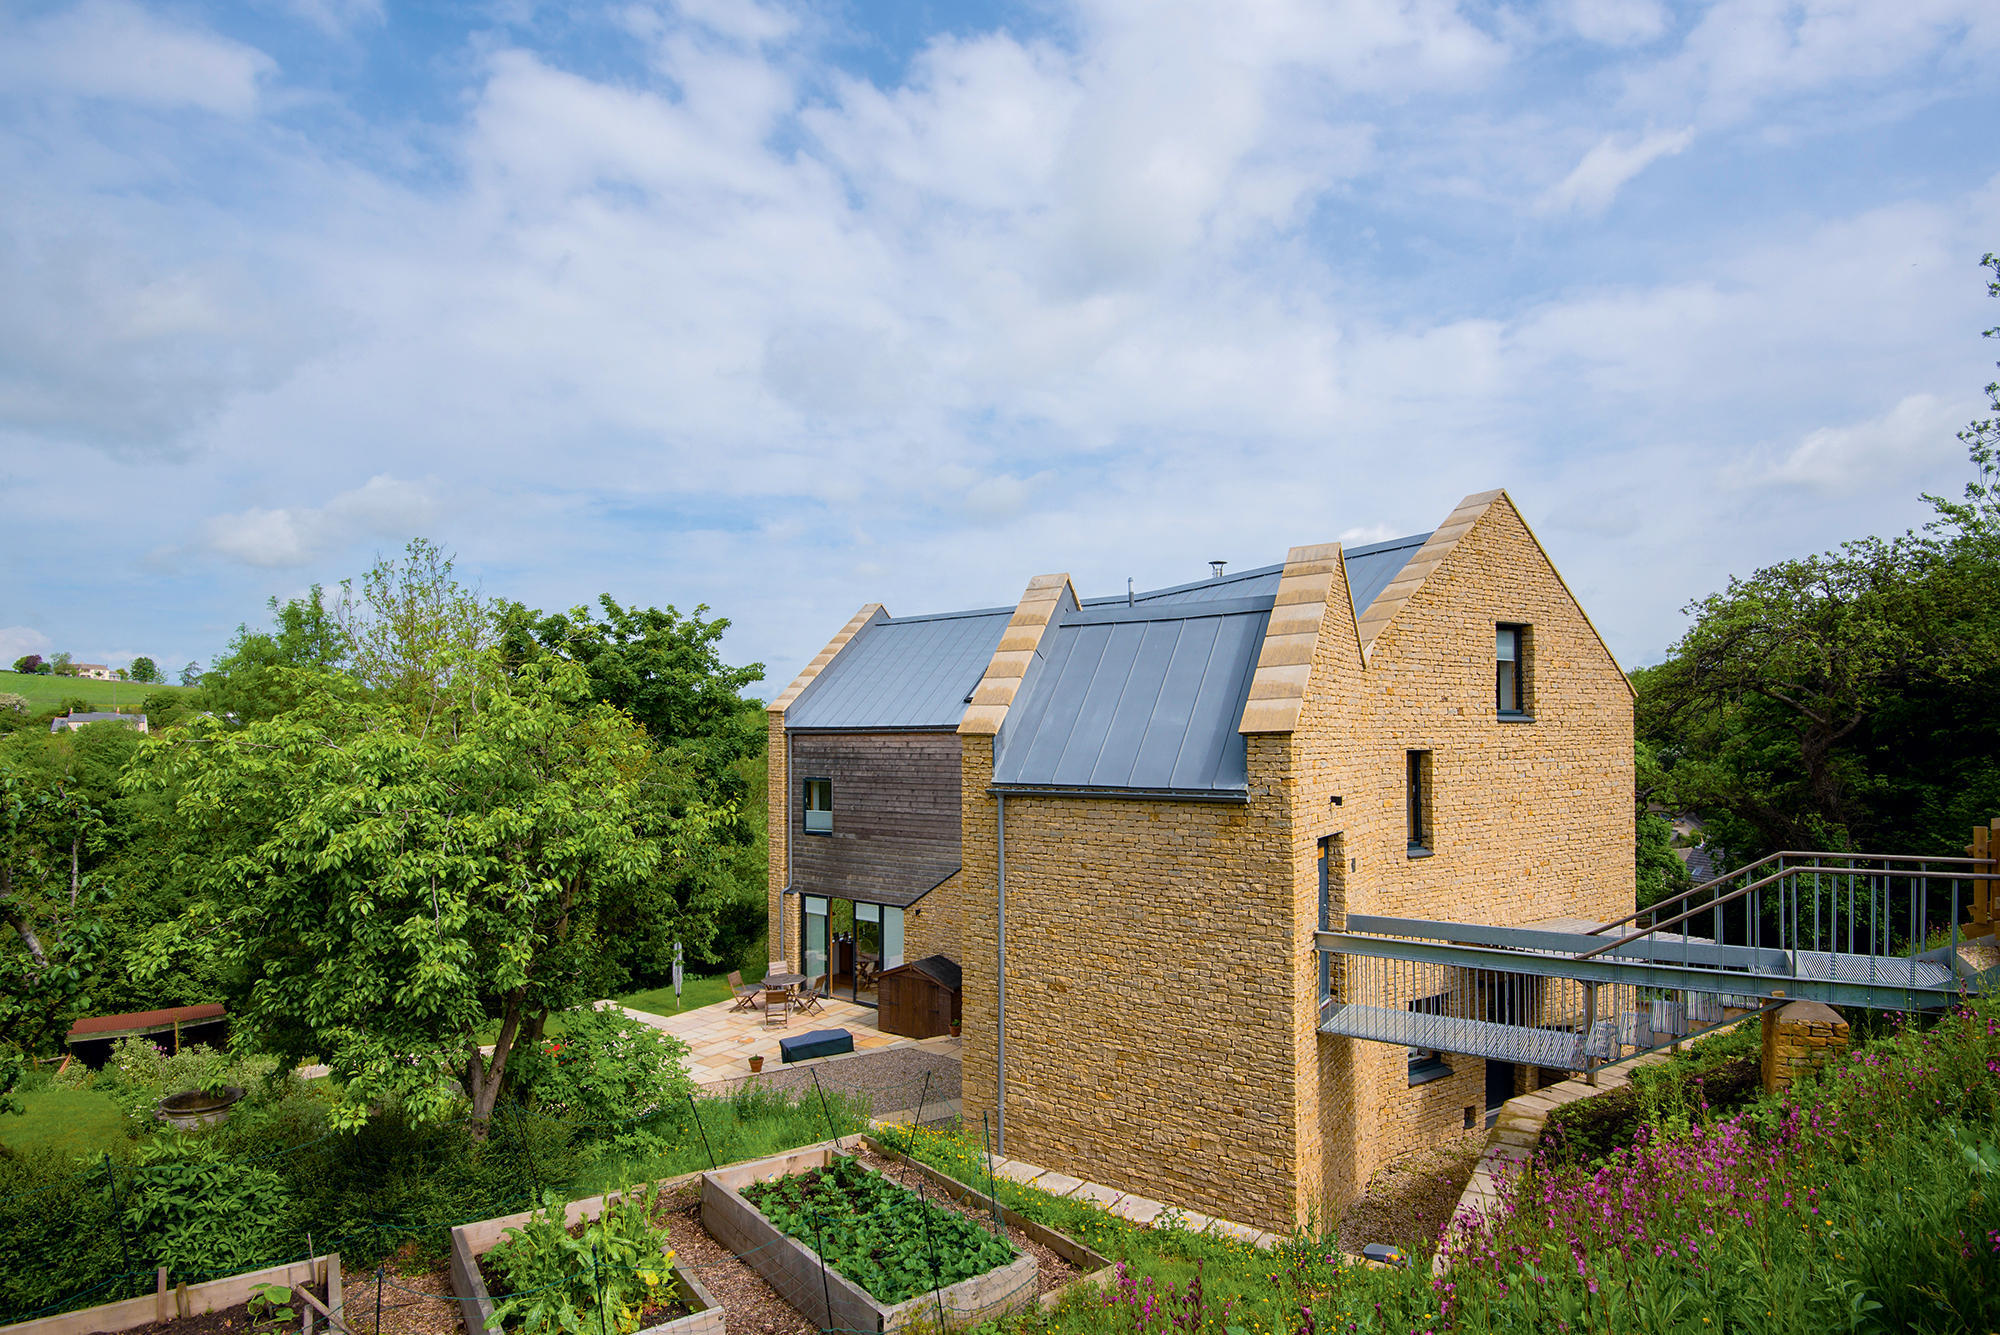 Timber frame self-build on a sloping plot